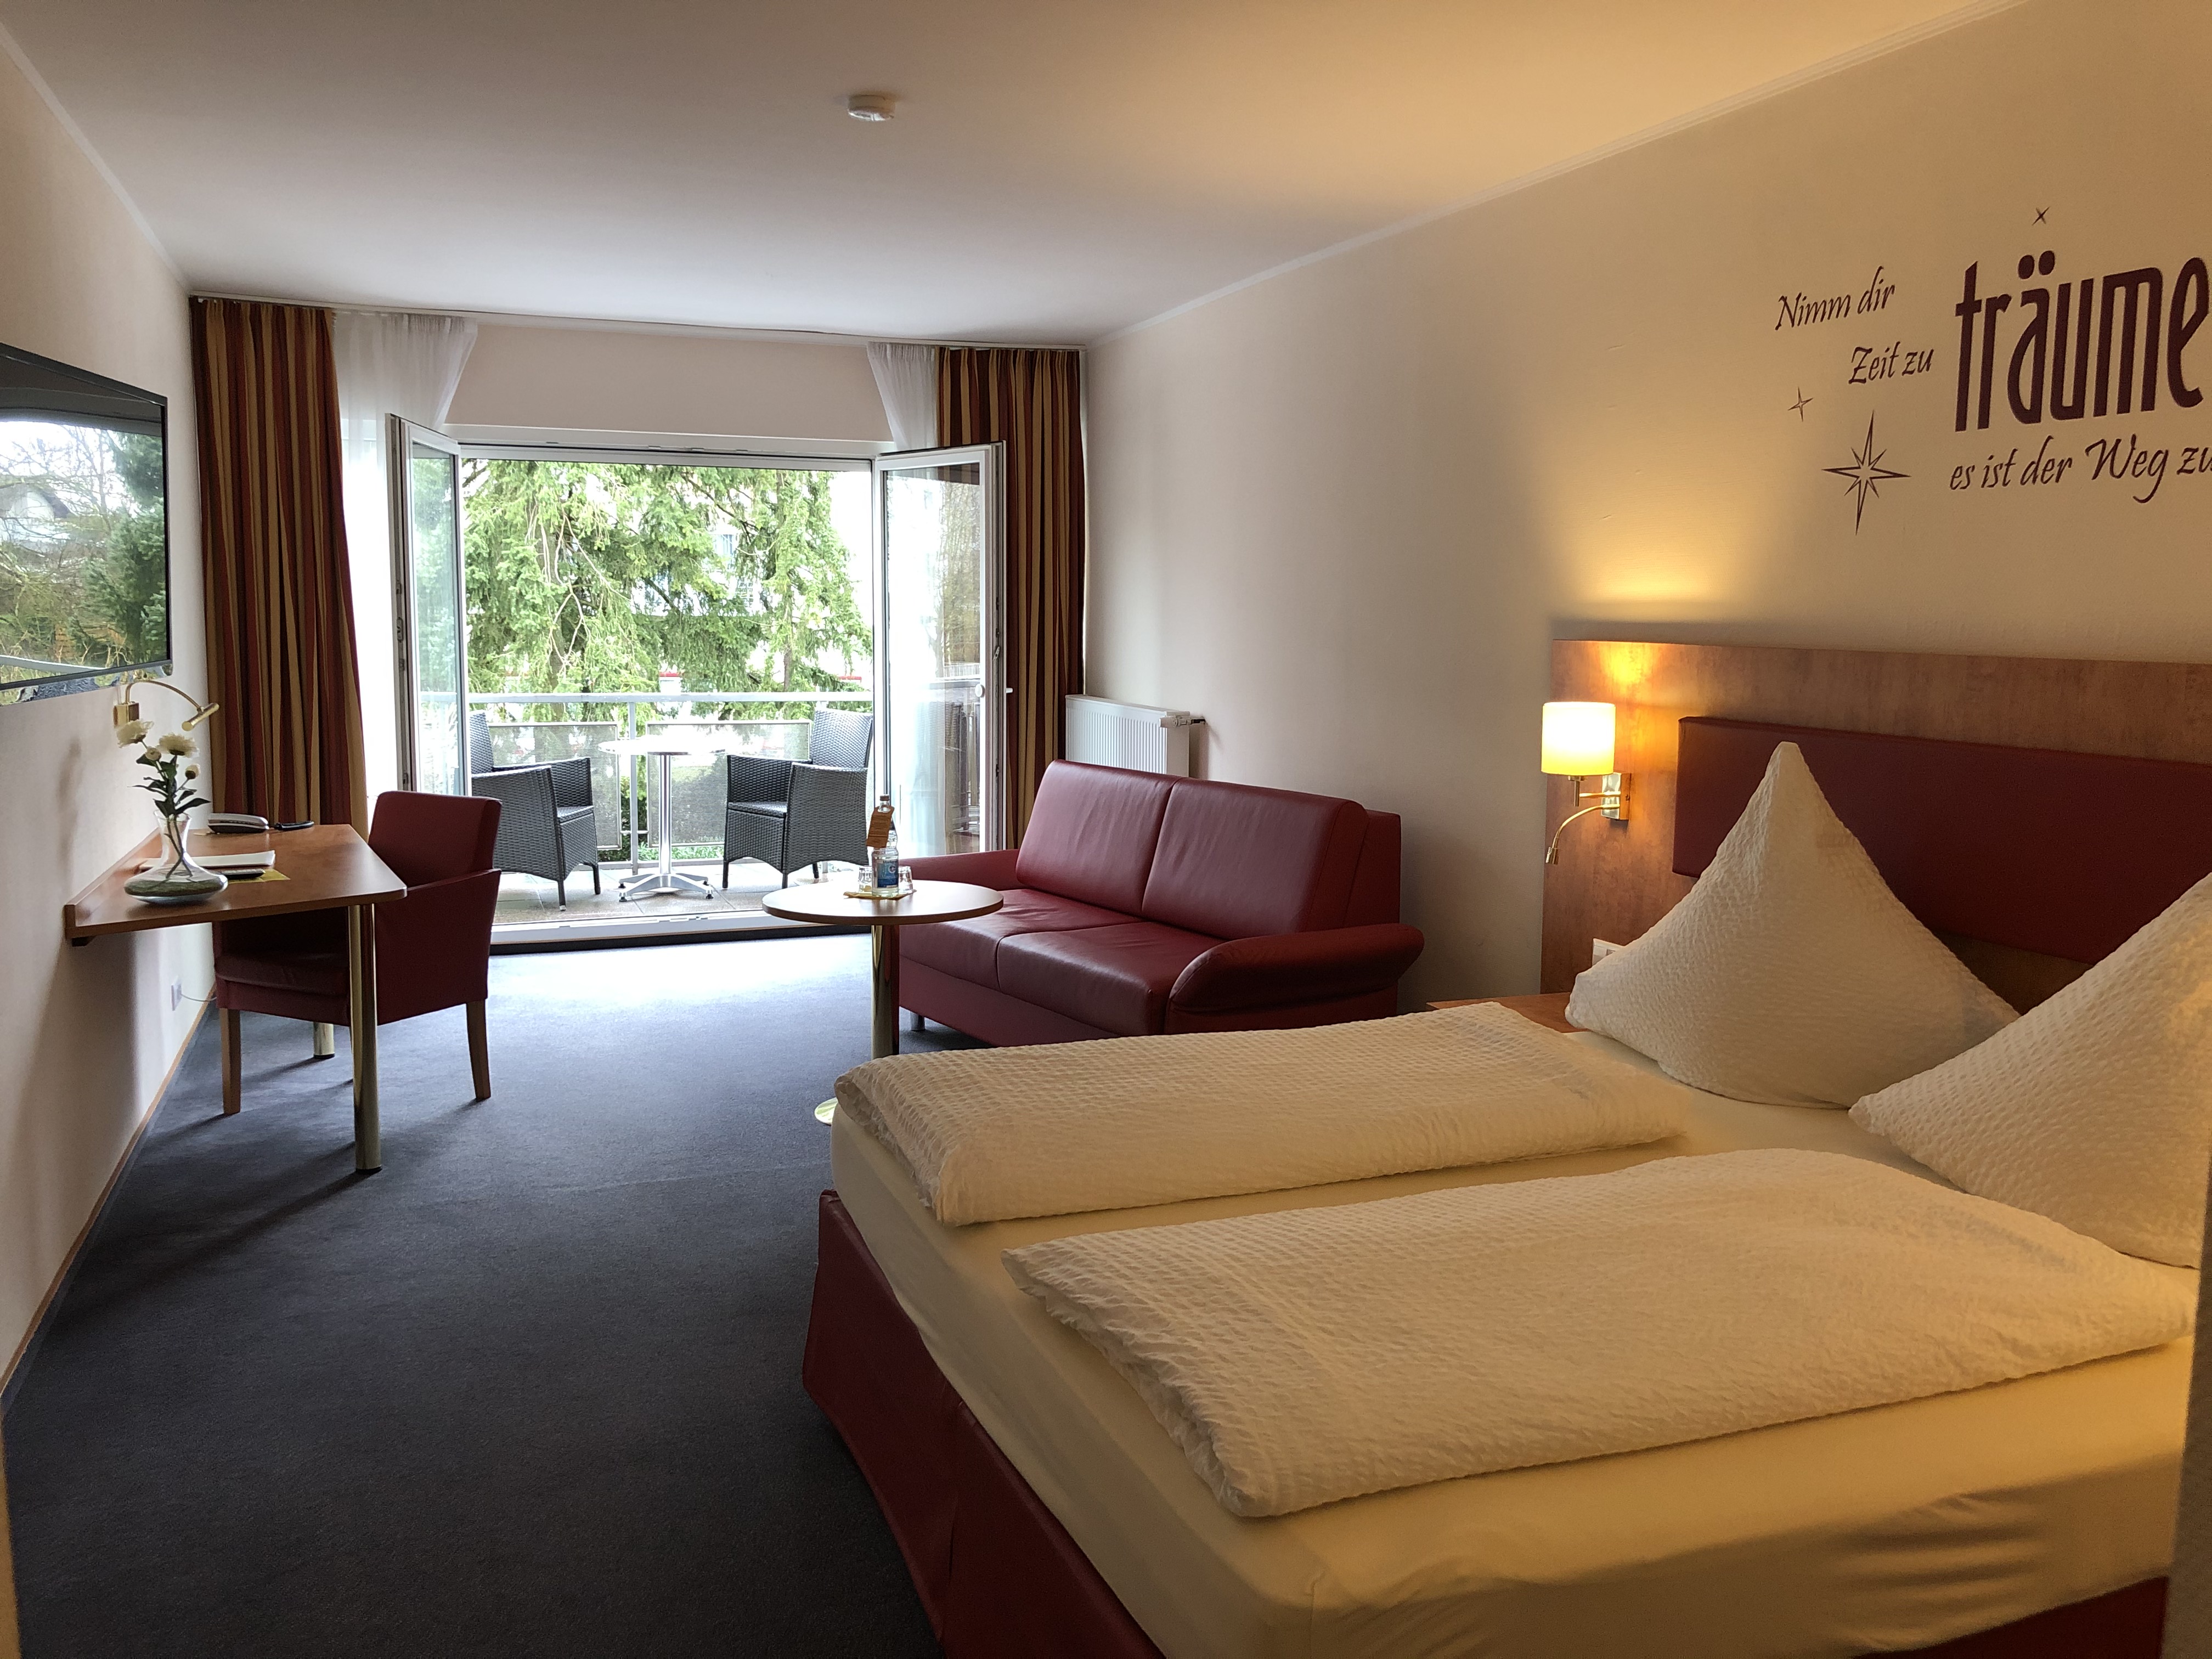 Hotel Häfner <br/>87.00 ew <br/> <a href='http://vakantieoplossing.nl/outpage/?id=15603e34dfd2465750d4638ad6d9b7ac' target='_blank'>View Details</a>